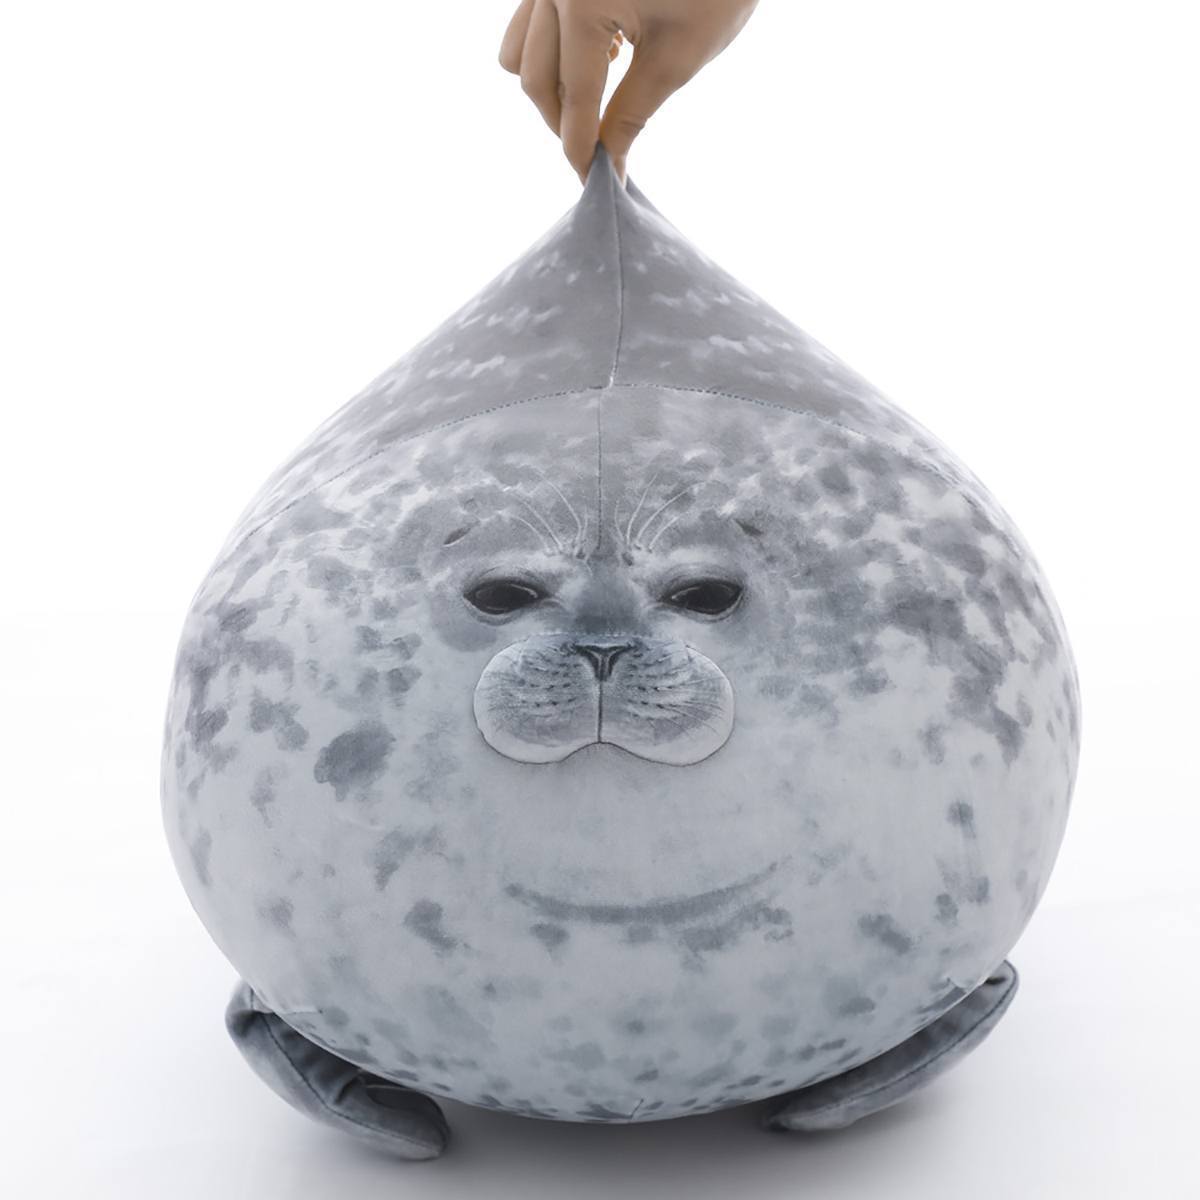 This Seal Pillow Is So Squishy and Adorable That You'll Want to